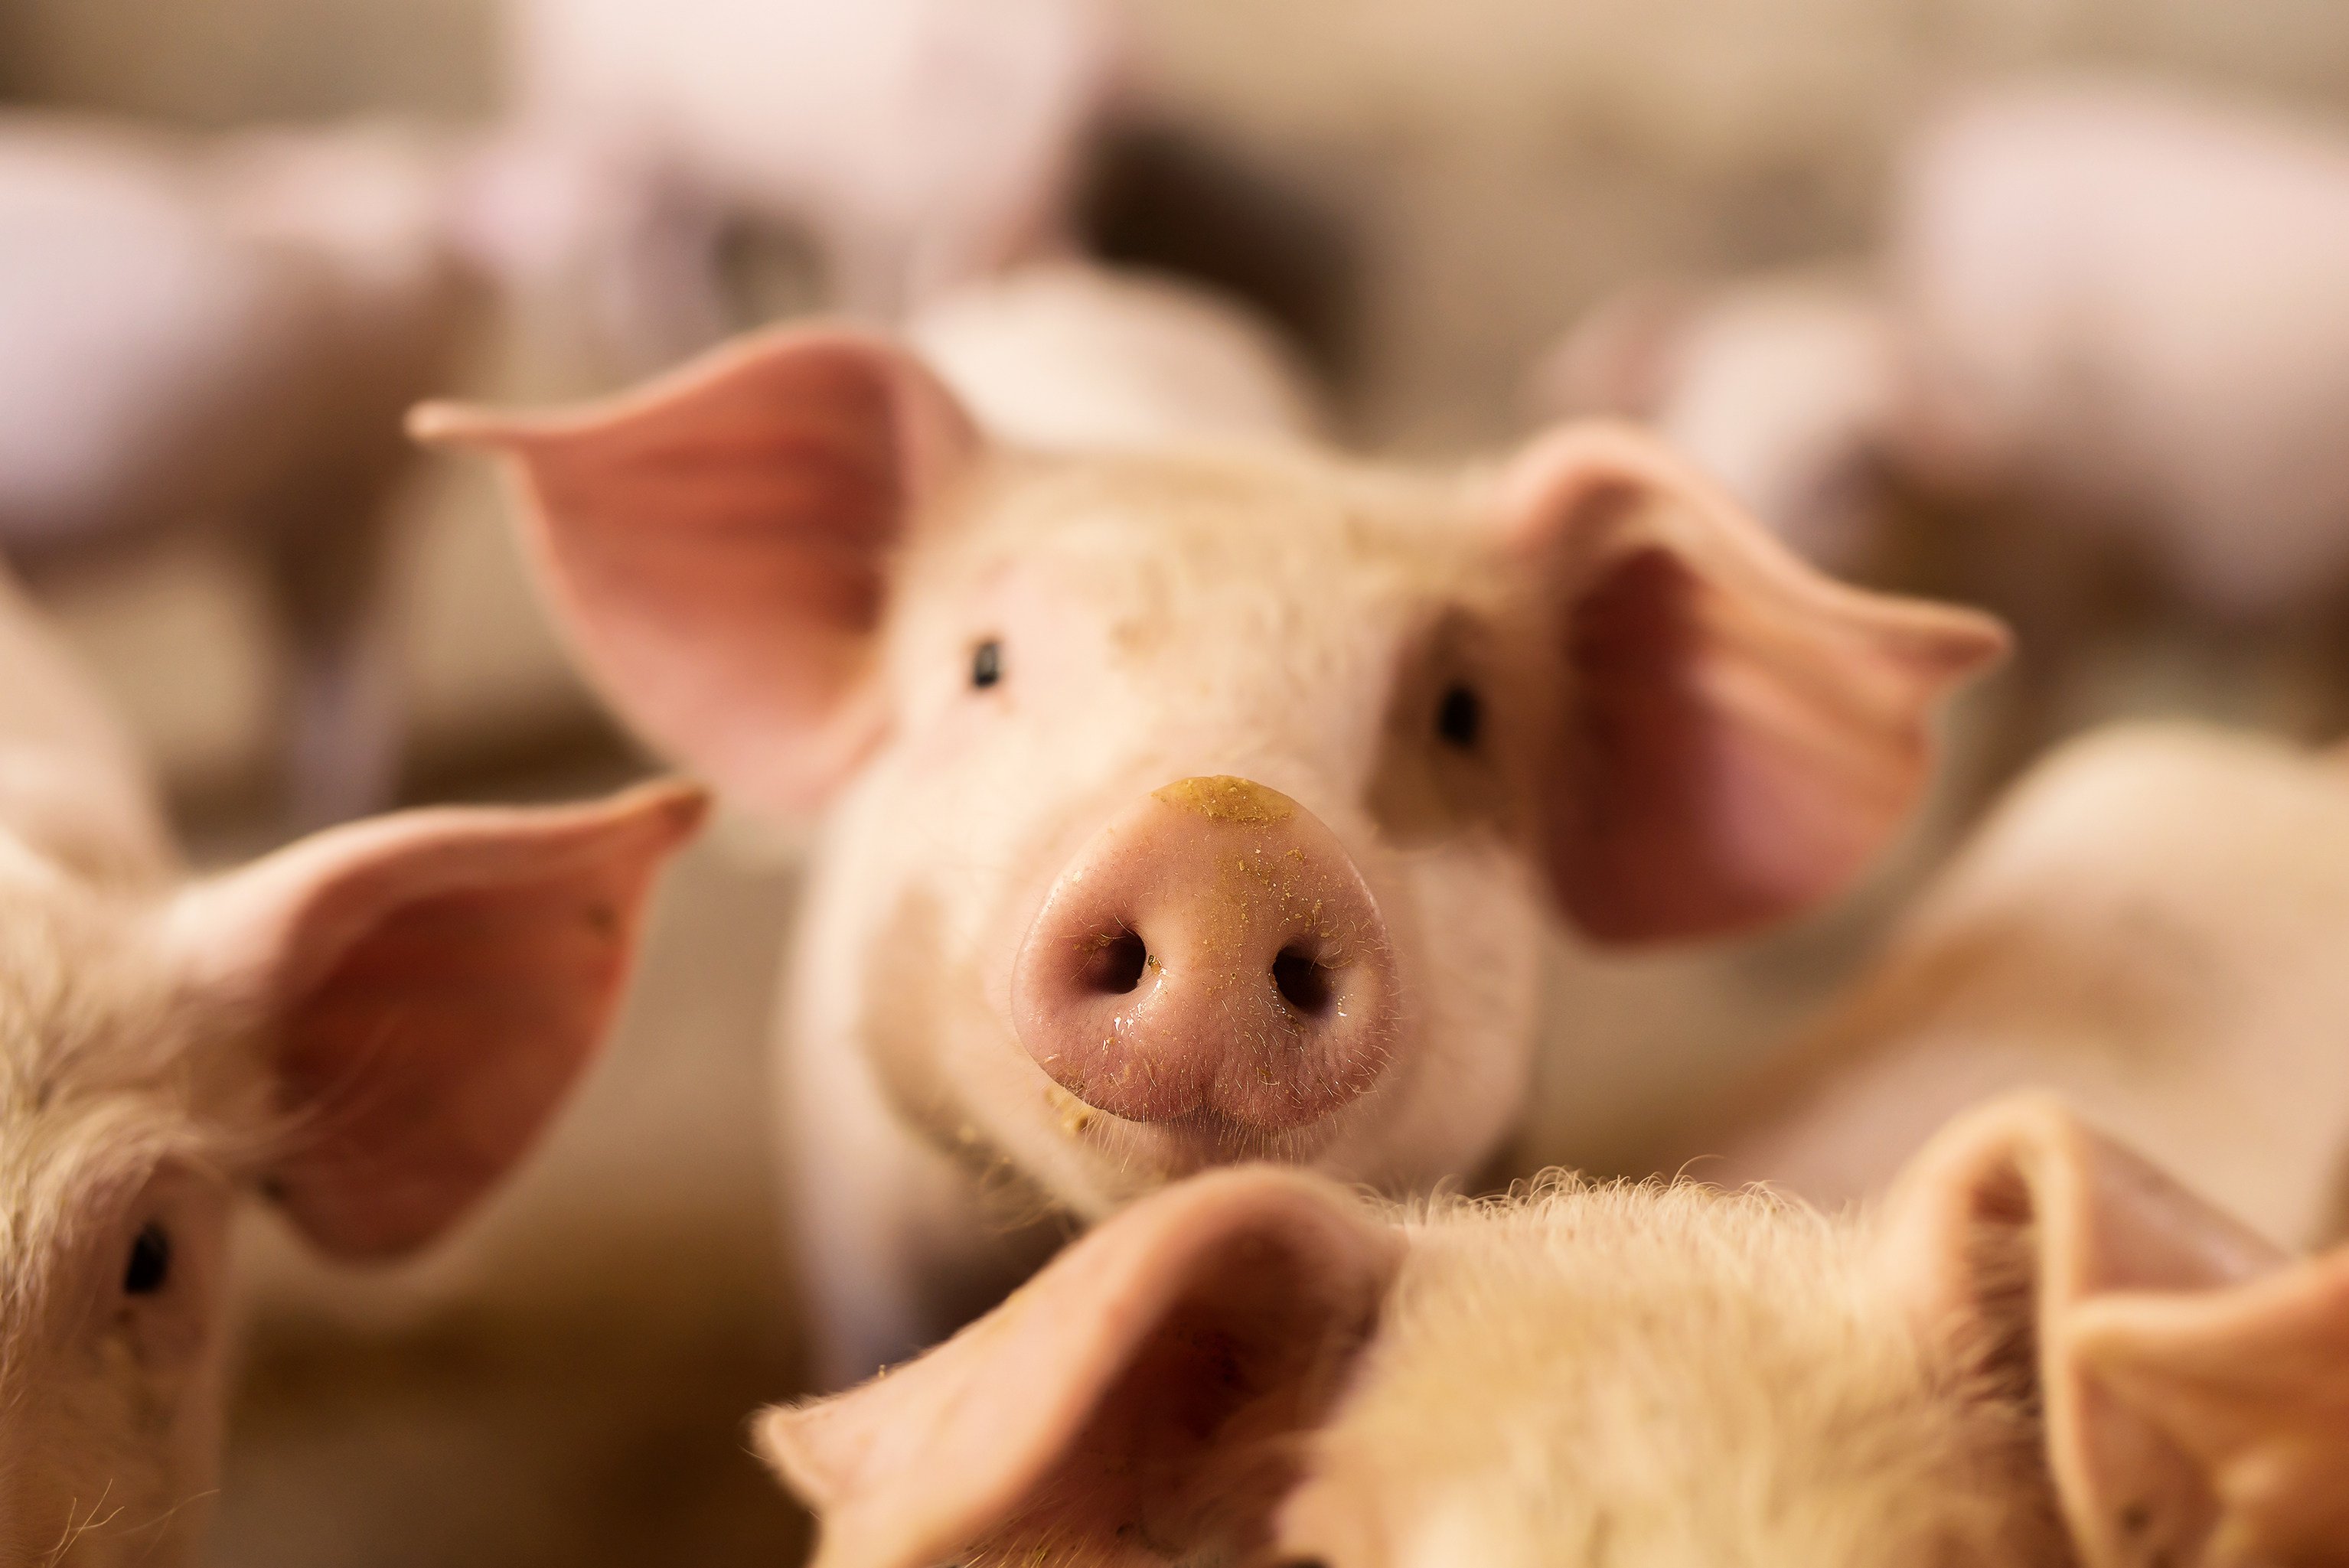 Pigs are used for transplants because of the similarities between their organs and human ones. Photo: Shutterstock Images